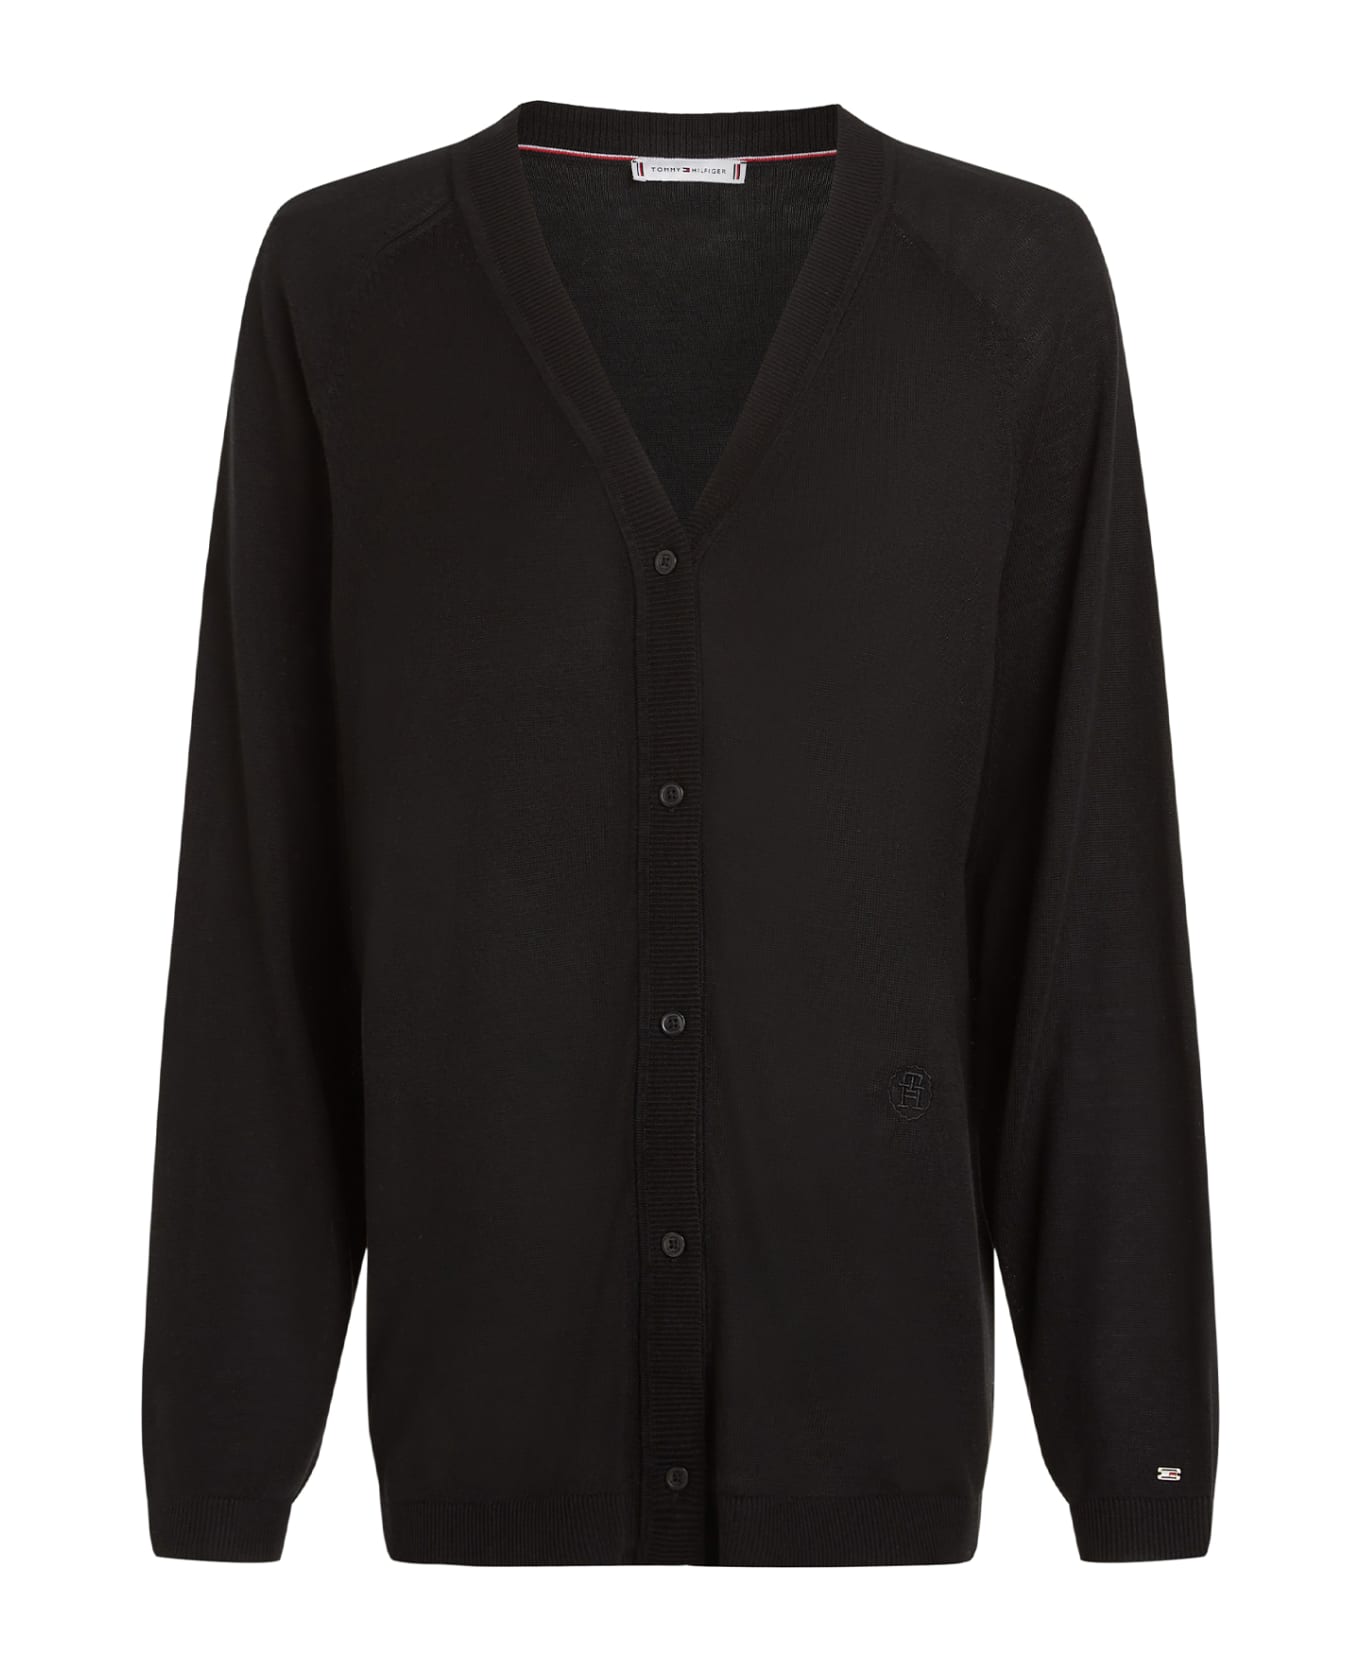 Tommy Hilfiger Black Cardigan With Buttons - BLACK